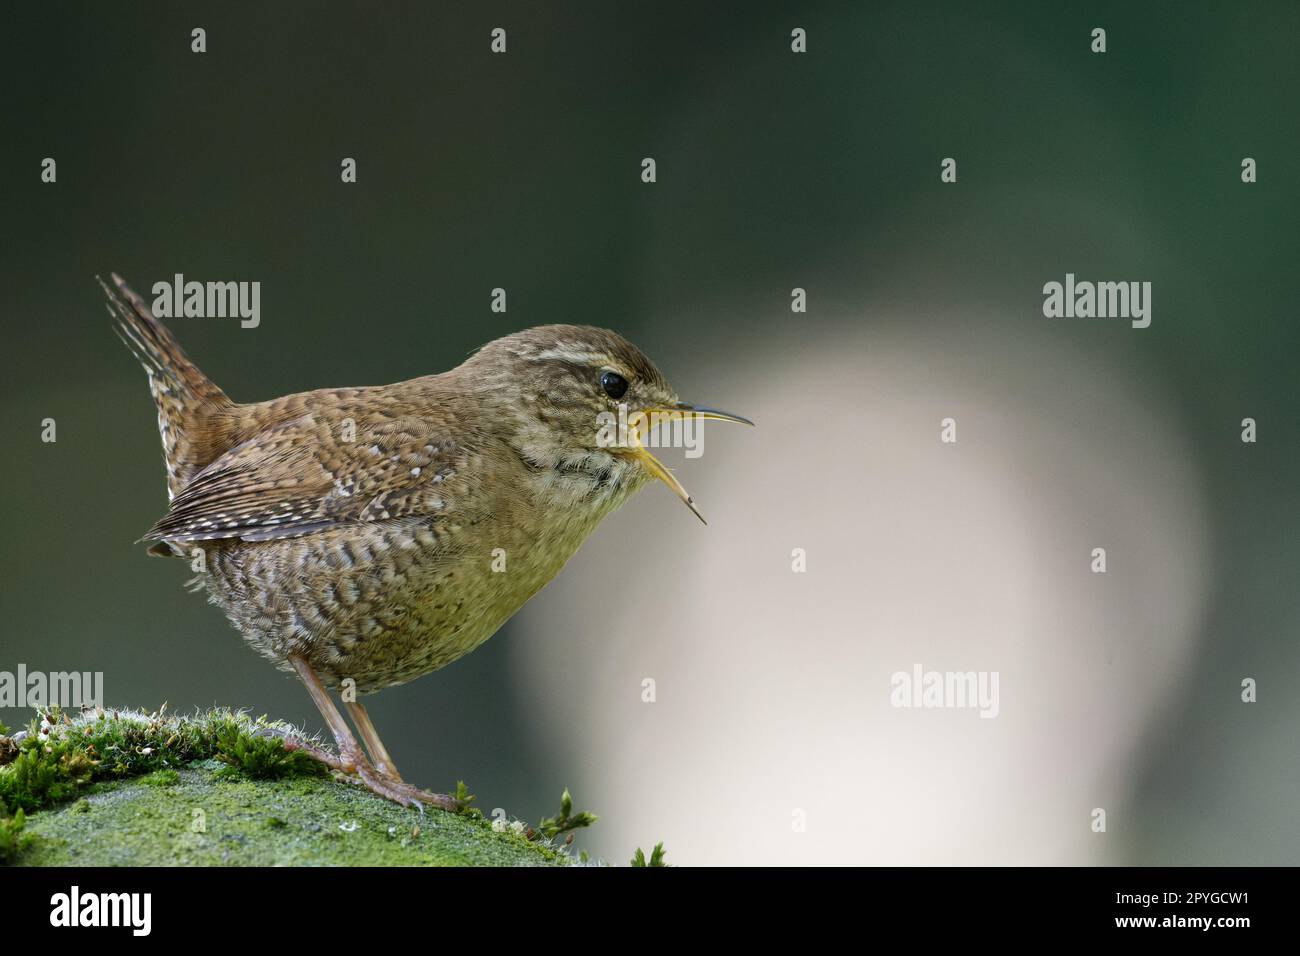 wren on a mossy stone singing with wide open beak Stock Photo